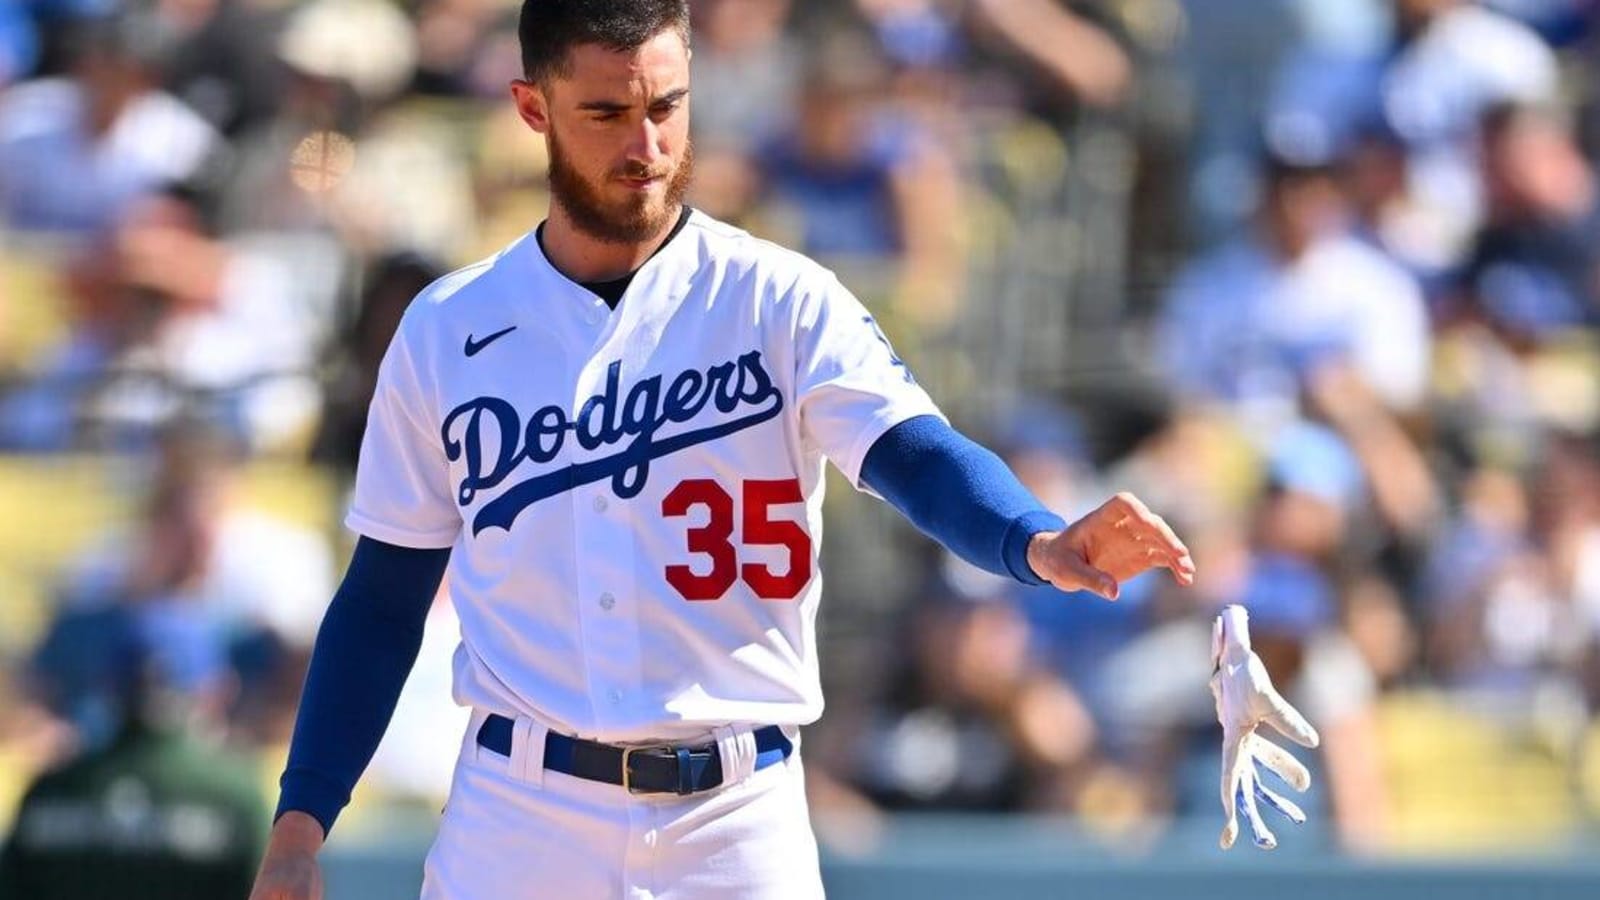 Report: Dodgers to make OF Cody Bellinger a free agent